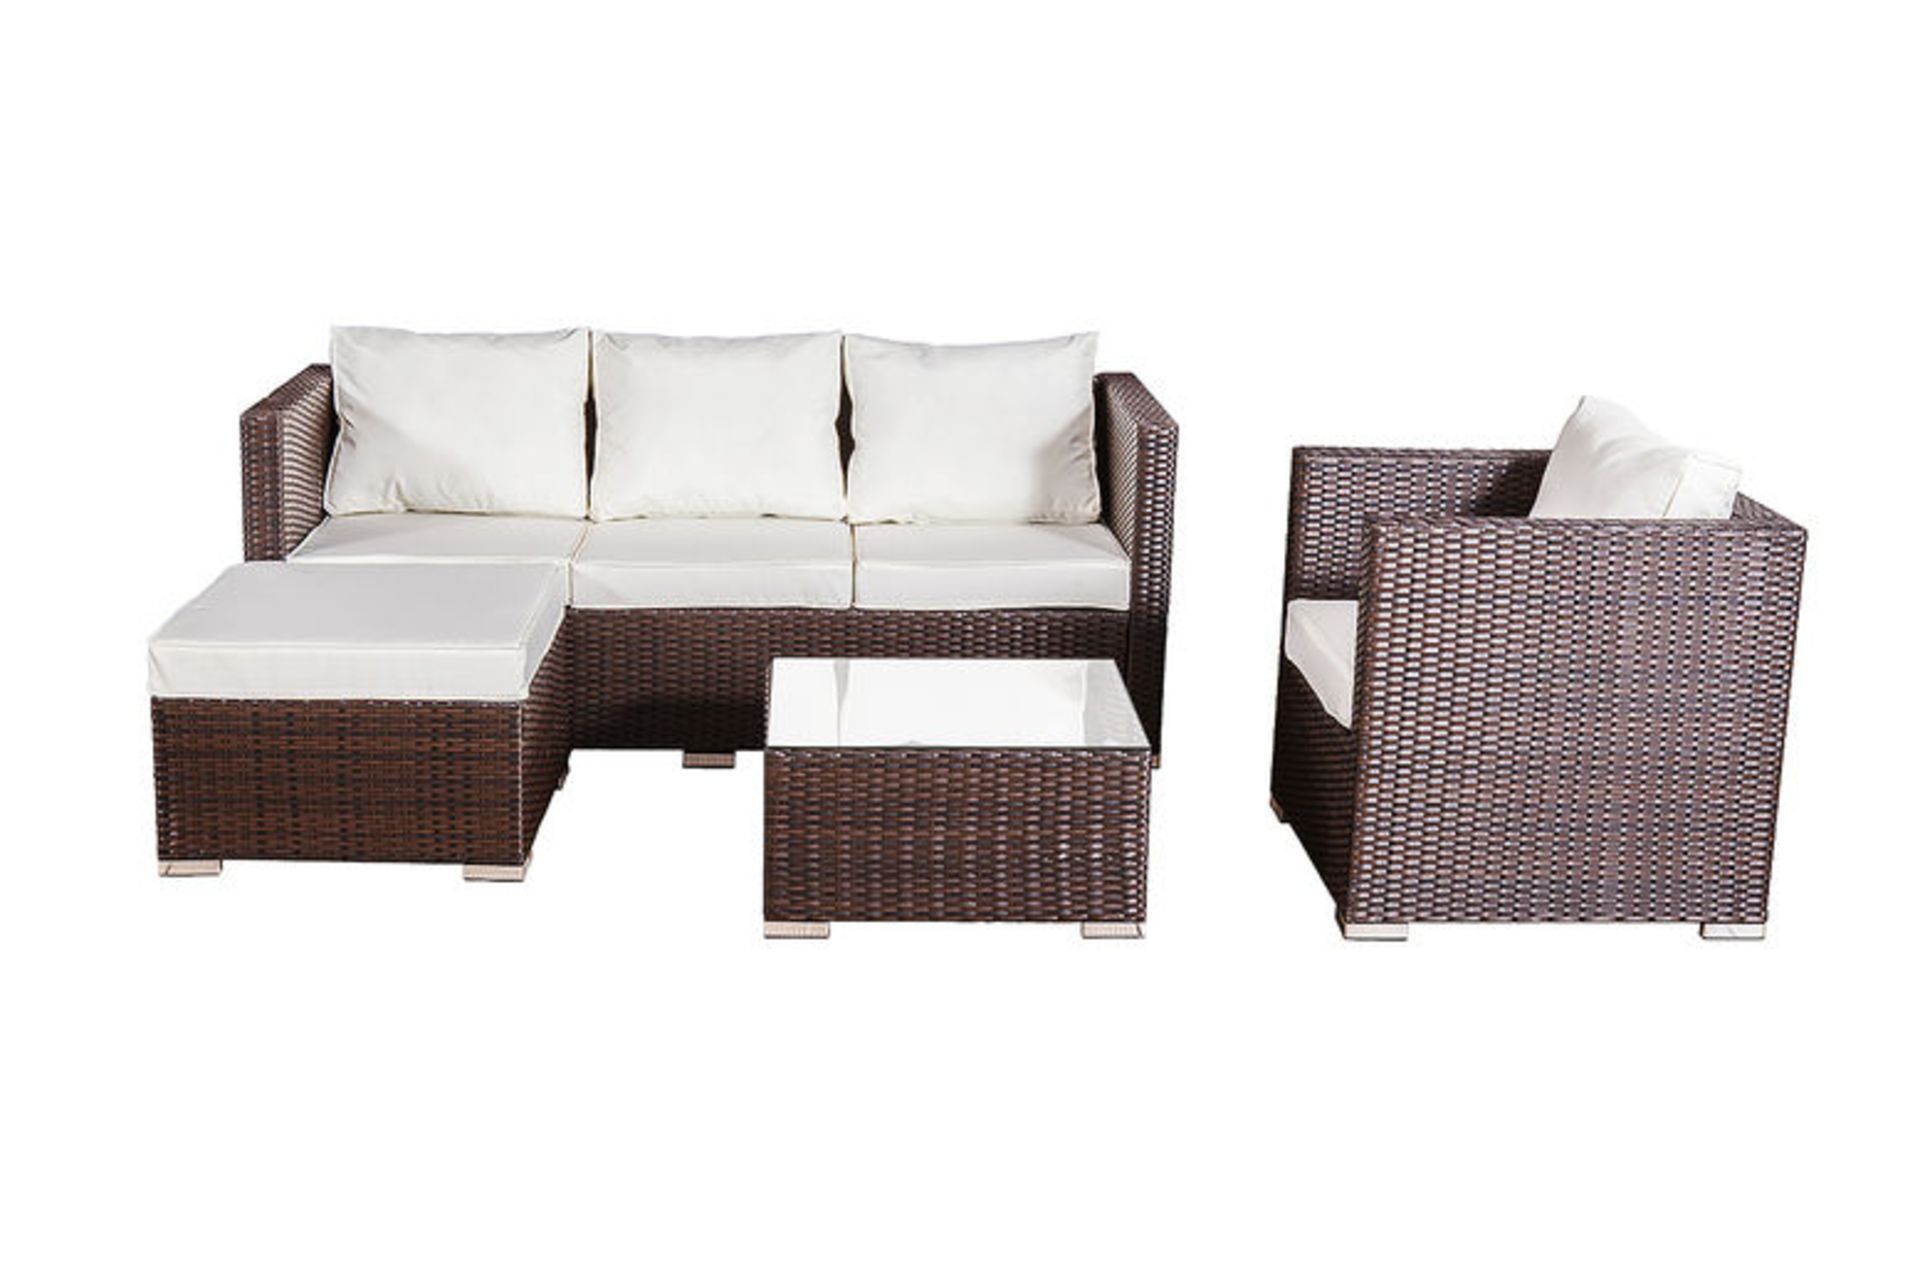 PALLET CONTAINING 2 X BRAND NEW 5 SEATER RATTAN GARDEN SETS (BROWN)